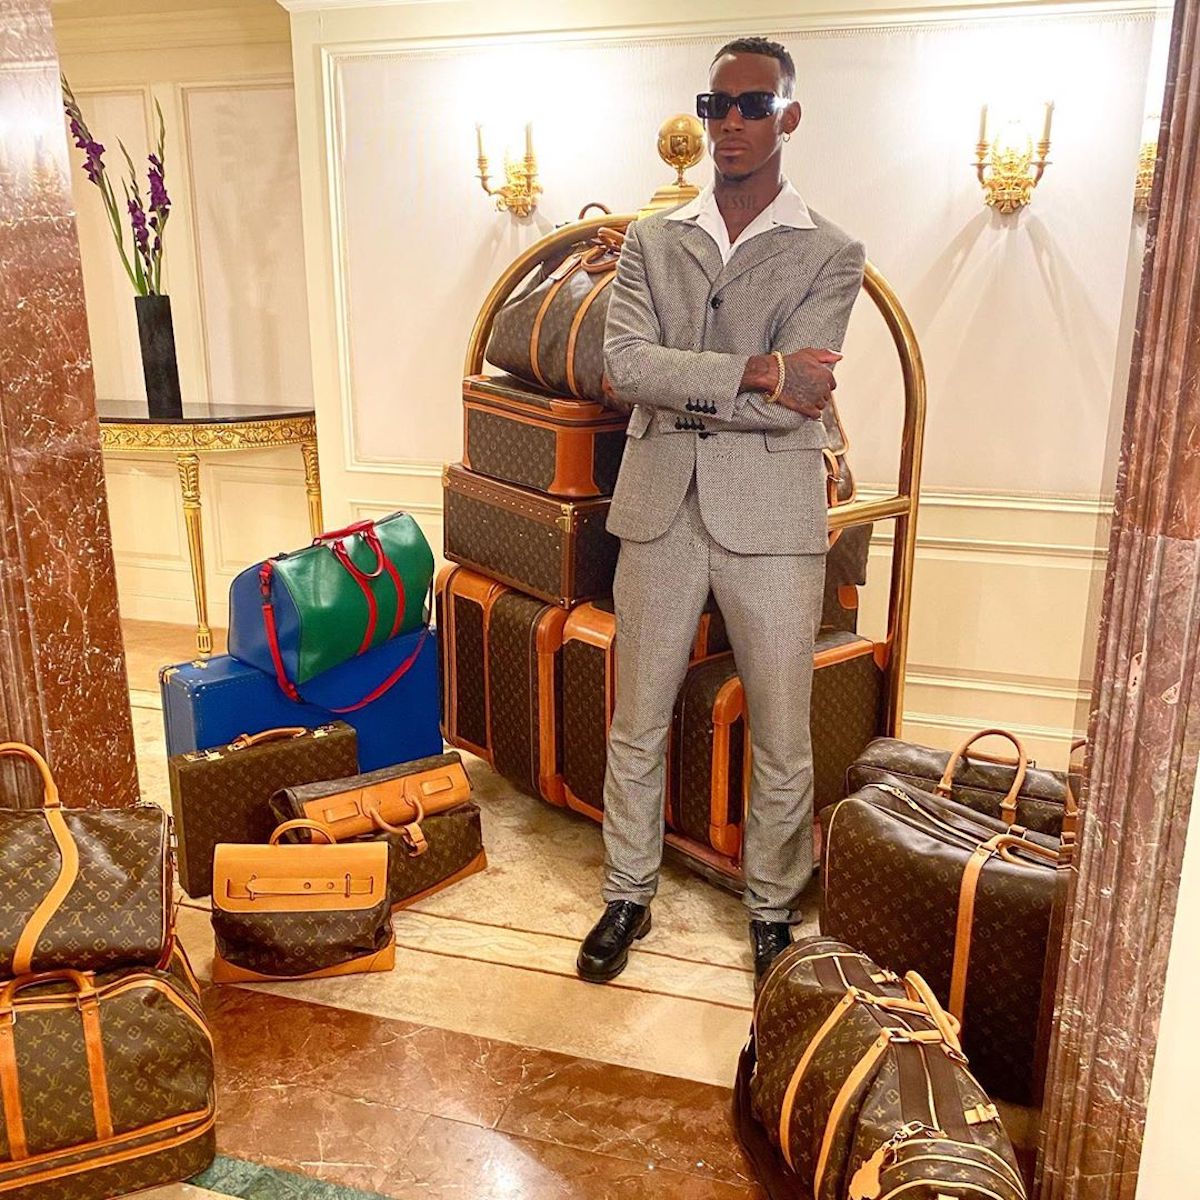 SPOTTED: Octavian Shares Louis Vuitton Luggage Collection